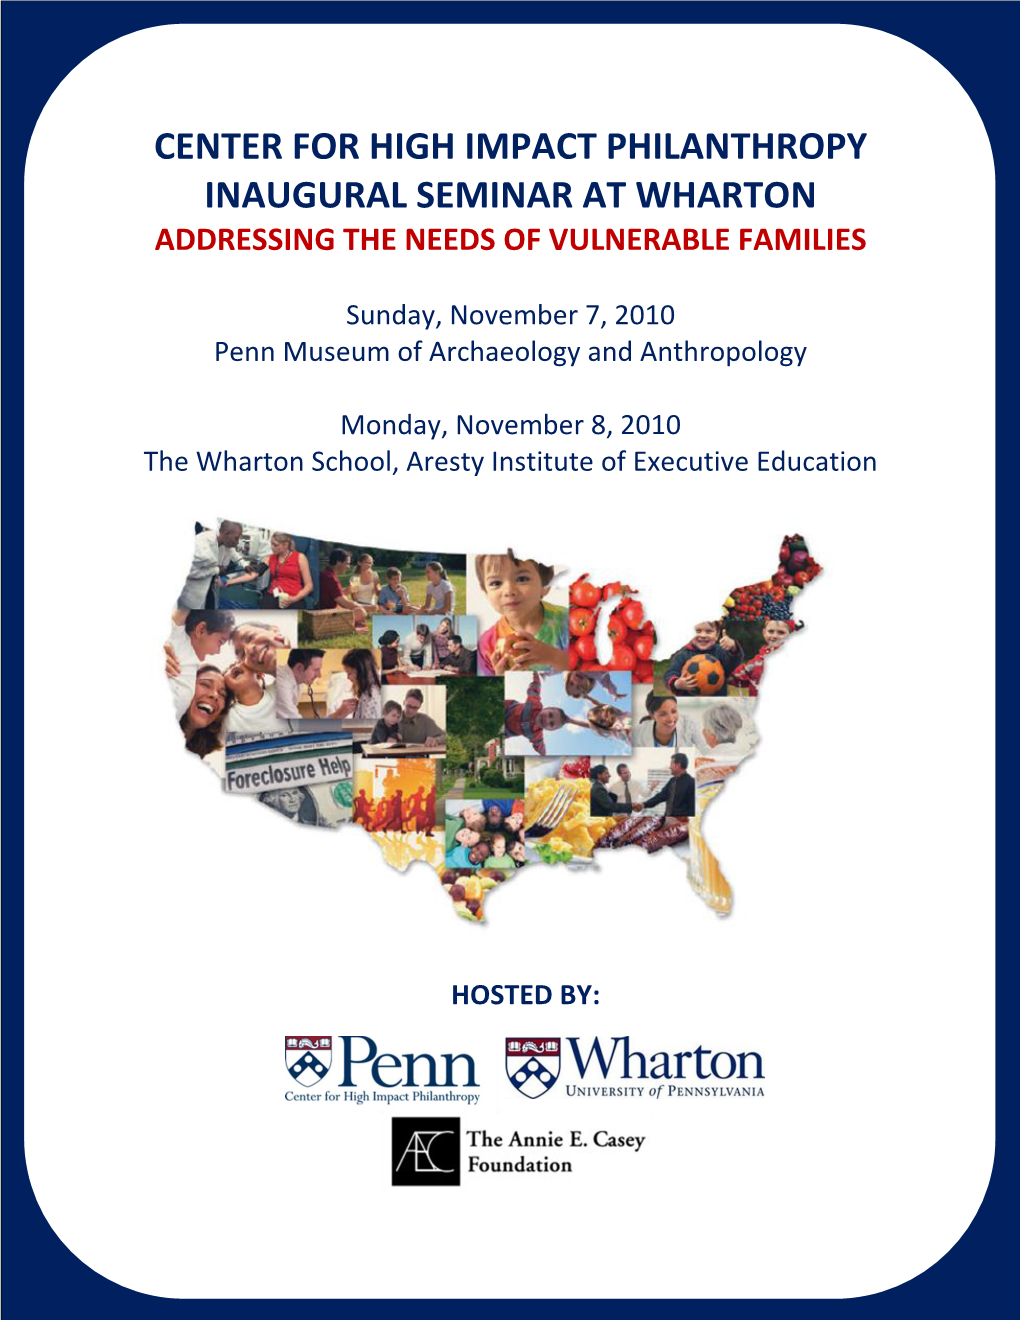 Center for High Impact Philanthropy Inaugural Seminar at Wharton Addressing the Needs of Vulnerable Families